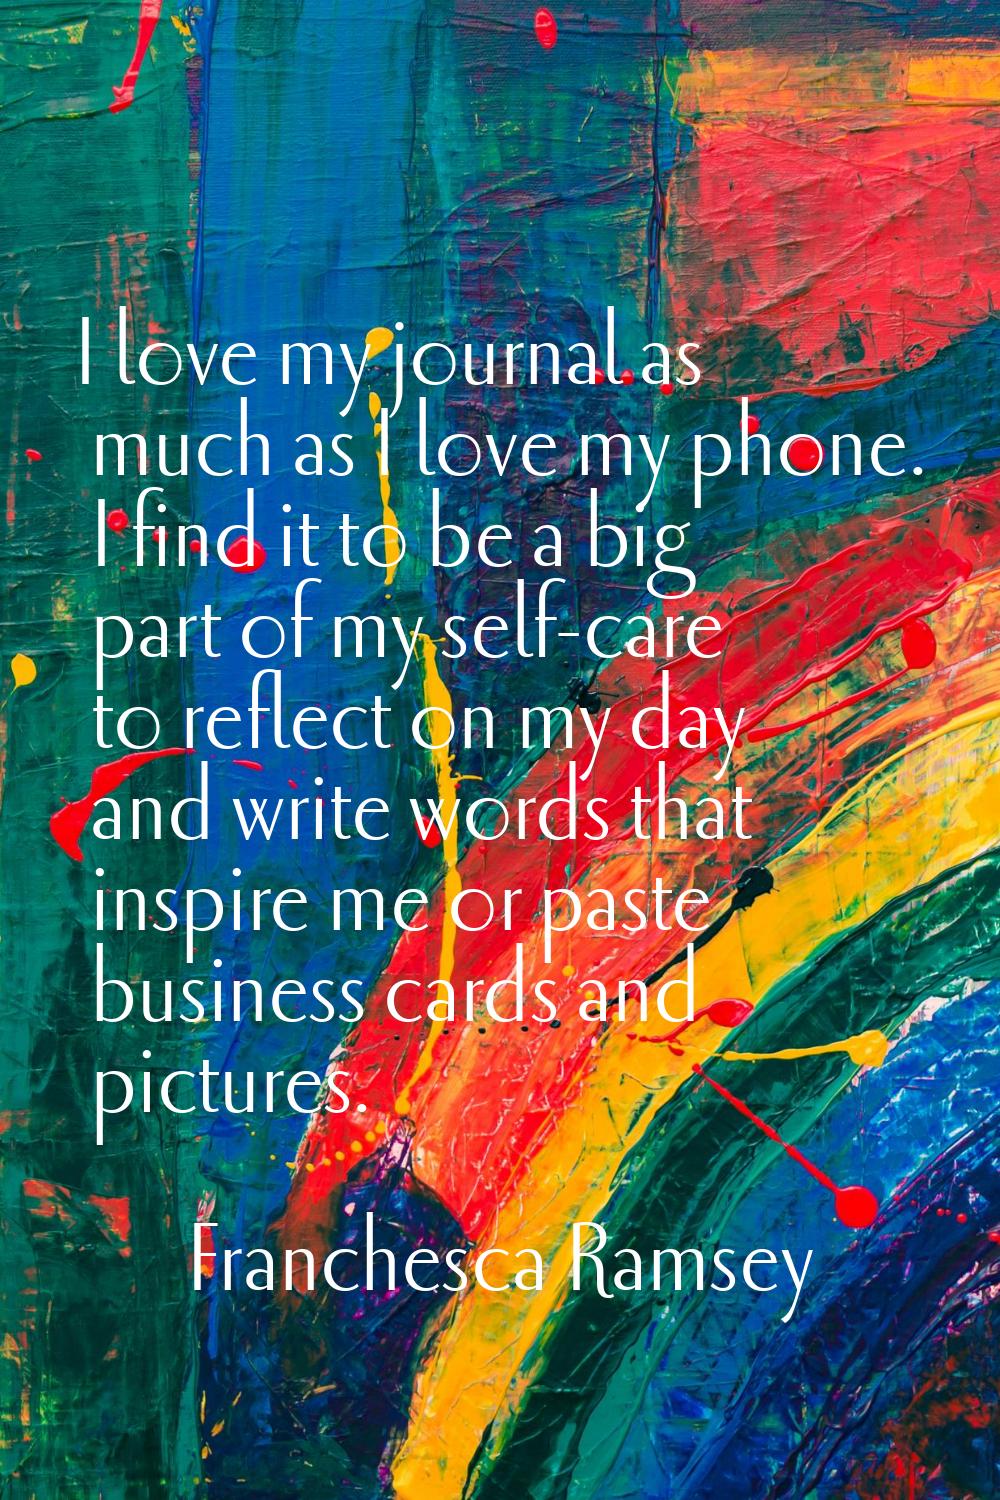 I love my journal as much as I love my phone. I find it to be a big part of my self-care to reflect